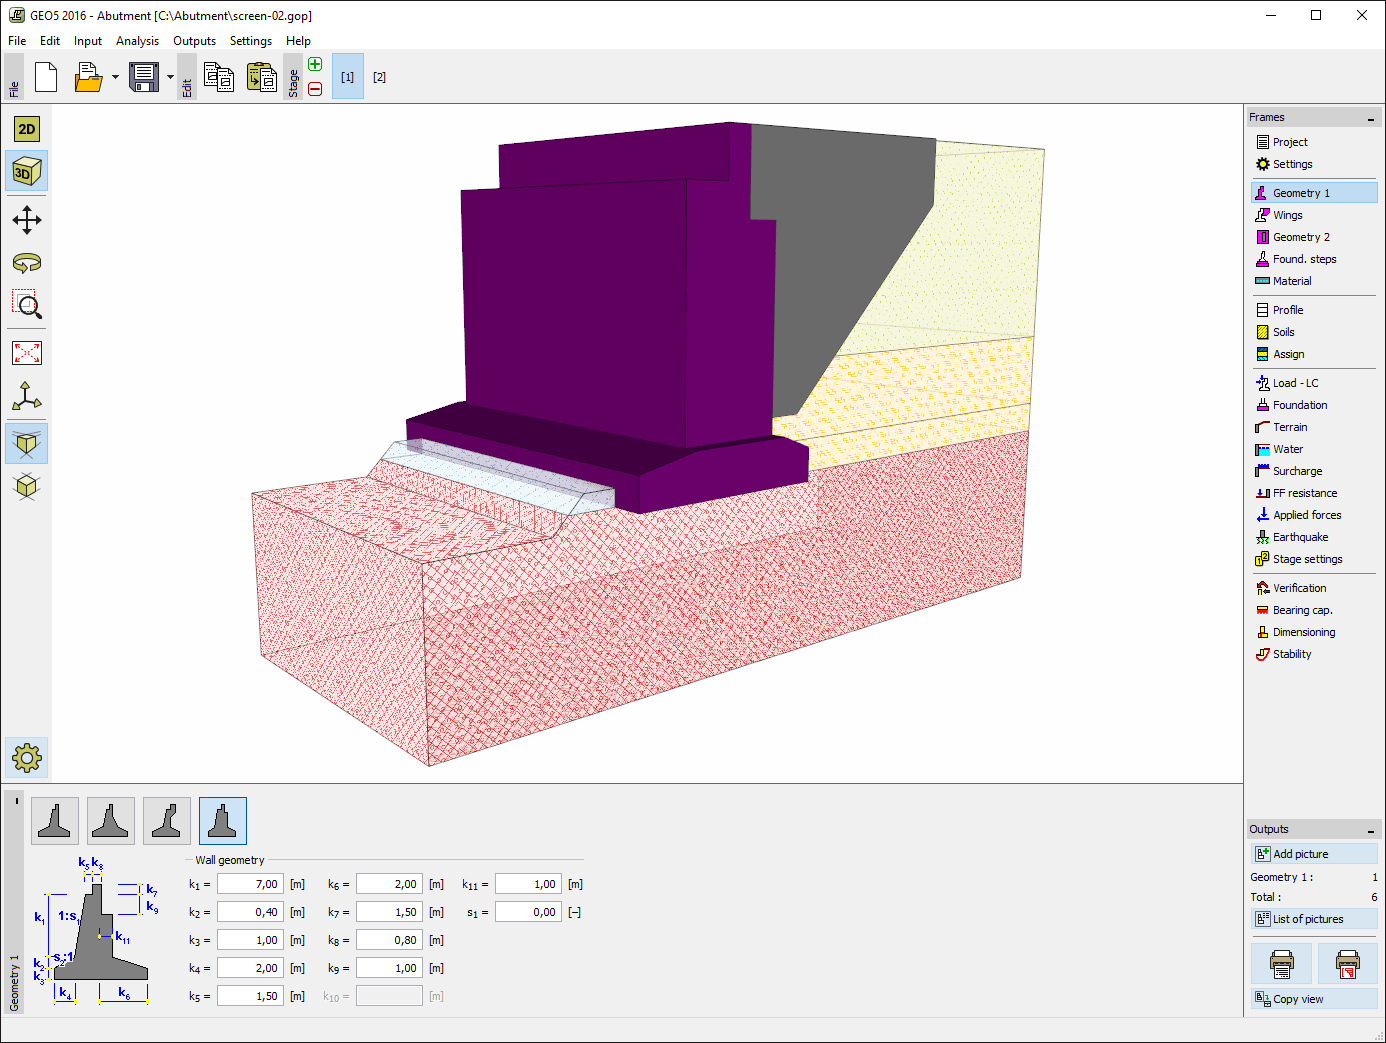 Abutment : 3D view